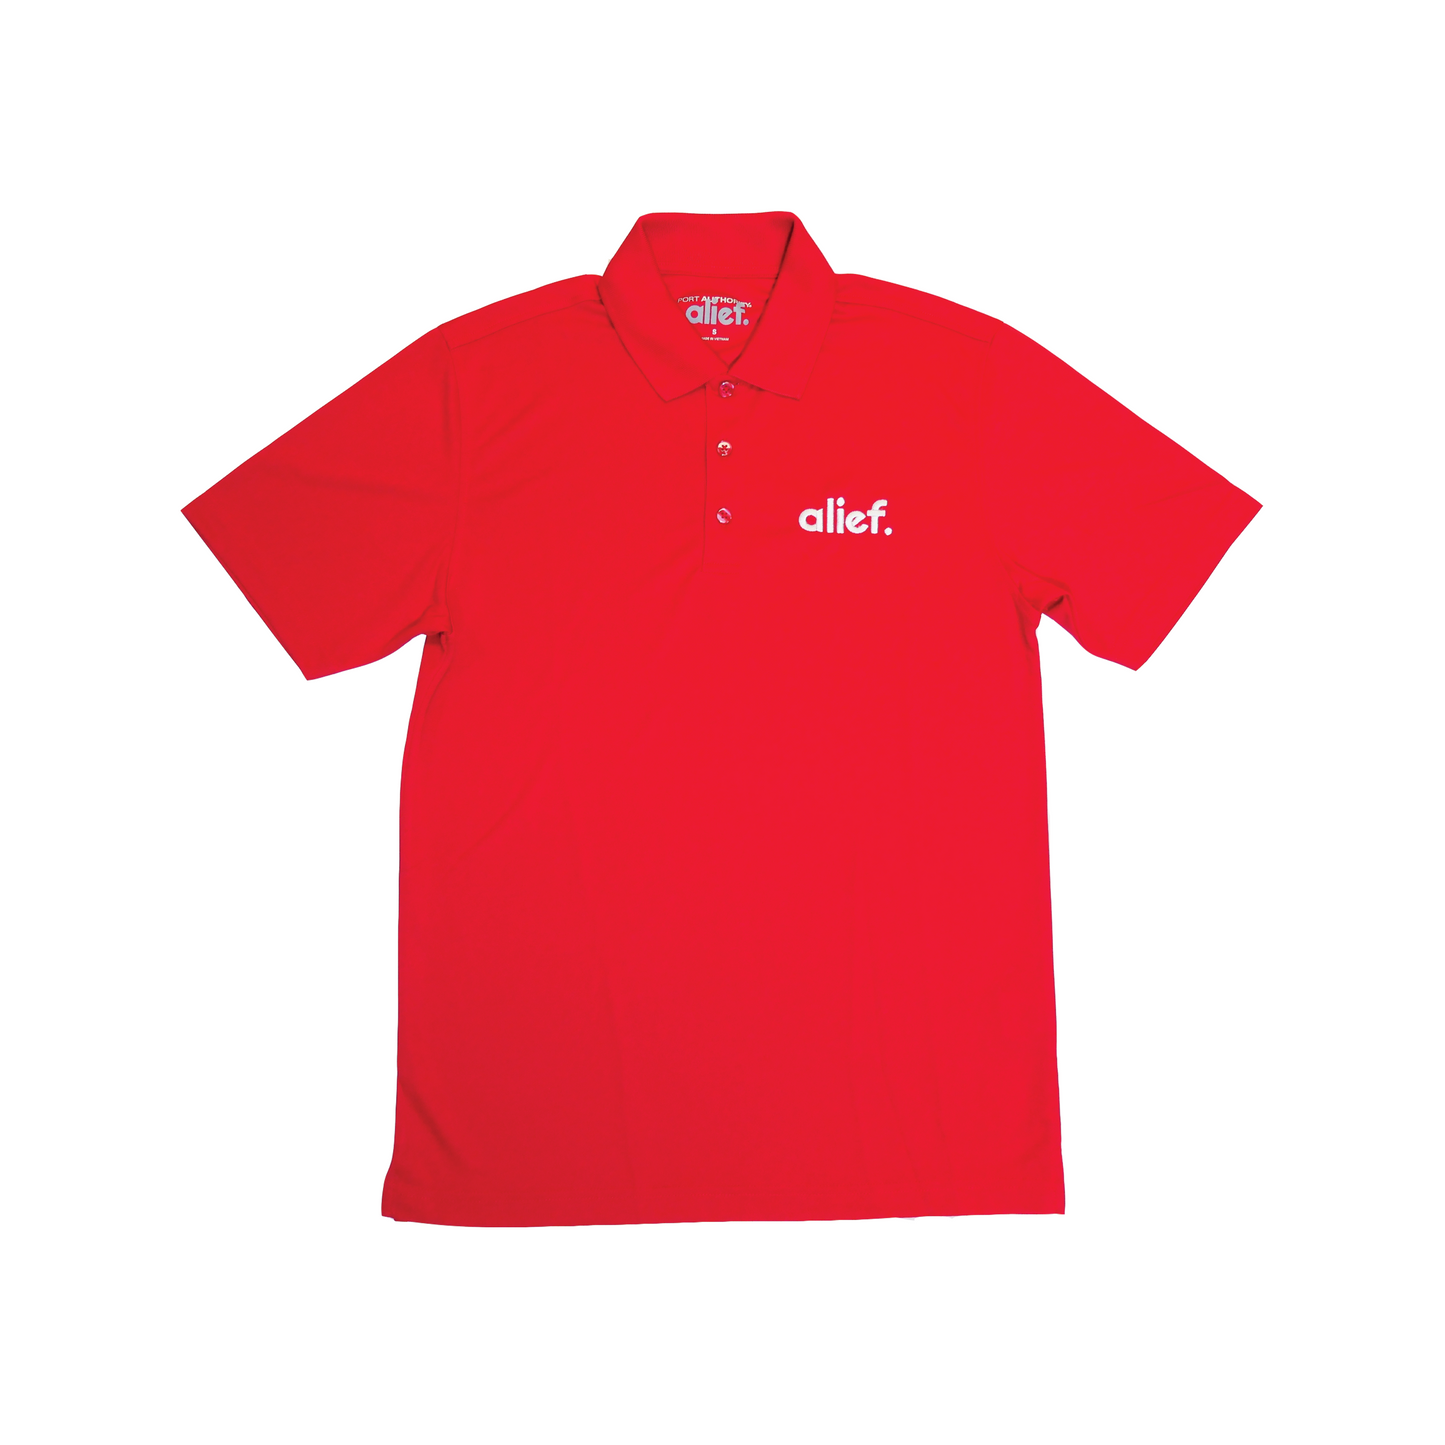 Embroidered Bold Alief Collar T-Shirts - Red/ White